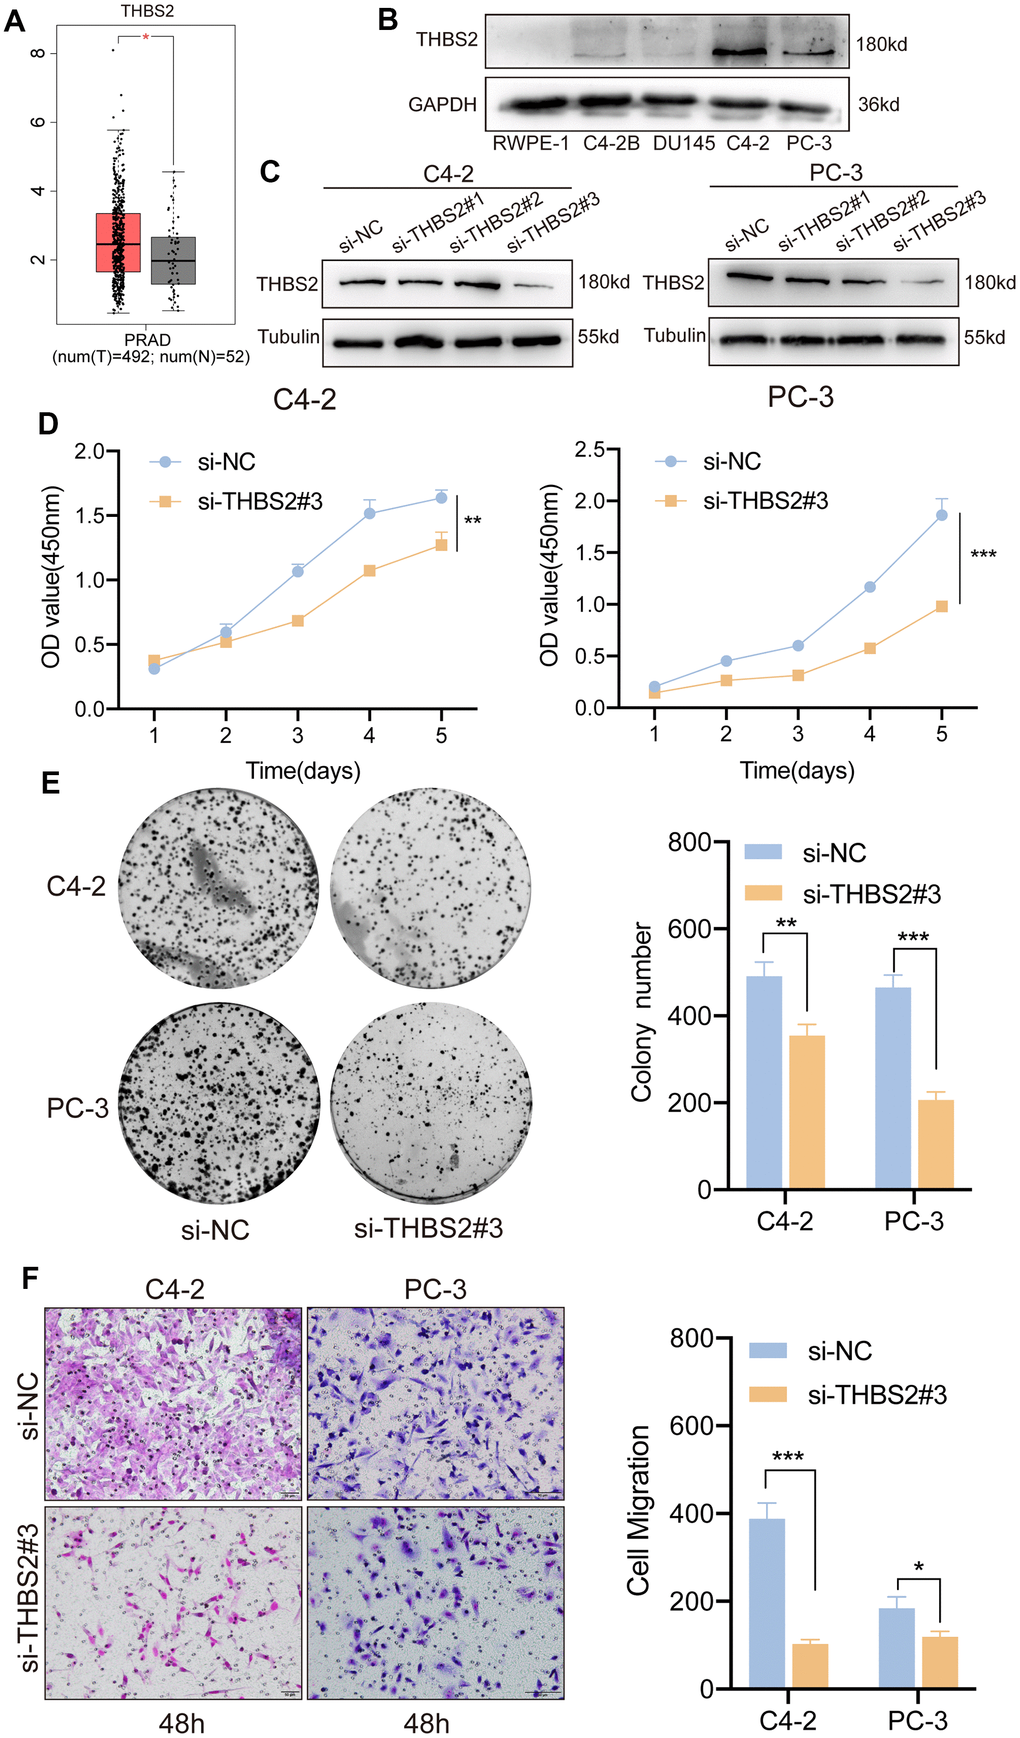 Inhibition of THBS2 affects the proliferation and migration of PCa cells in vitro. (A) The expression of THBS2 in TCGA PCa tumor tissues (n = 492) and the normal (n = 52). (B) Protein expression of THBS2 in the normal prostate epithelial cell line (RWPE-1) and PCa cell lines (C4-2B, DU145, C4-2 and PC-3). (C) Western blotting showing THBS2 siRNA knockdown compared to control siRNA treatment. (D) CCK-8 assay showed that THBS2 knockdown inhibited C4-2 and PC-3 cell proliferation. (E) The colony formation assay showed that THBS2 knockdown inhibited C4-2 and PC-3 colony formation. The graph on the right shows the colony numbers from 3 independent experiments. (F) Transwell assays showed that THBS2 knockdown inhibited C4-2 and PC-3 cell migration (Scale bar, 50 μm). The graph on the right shows the migrated cells from 3 independent experiments. All data are presented as the mean ± SD, *p p p 